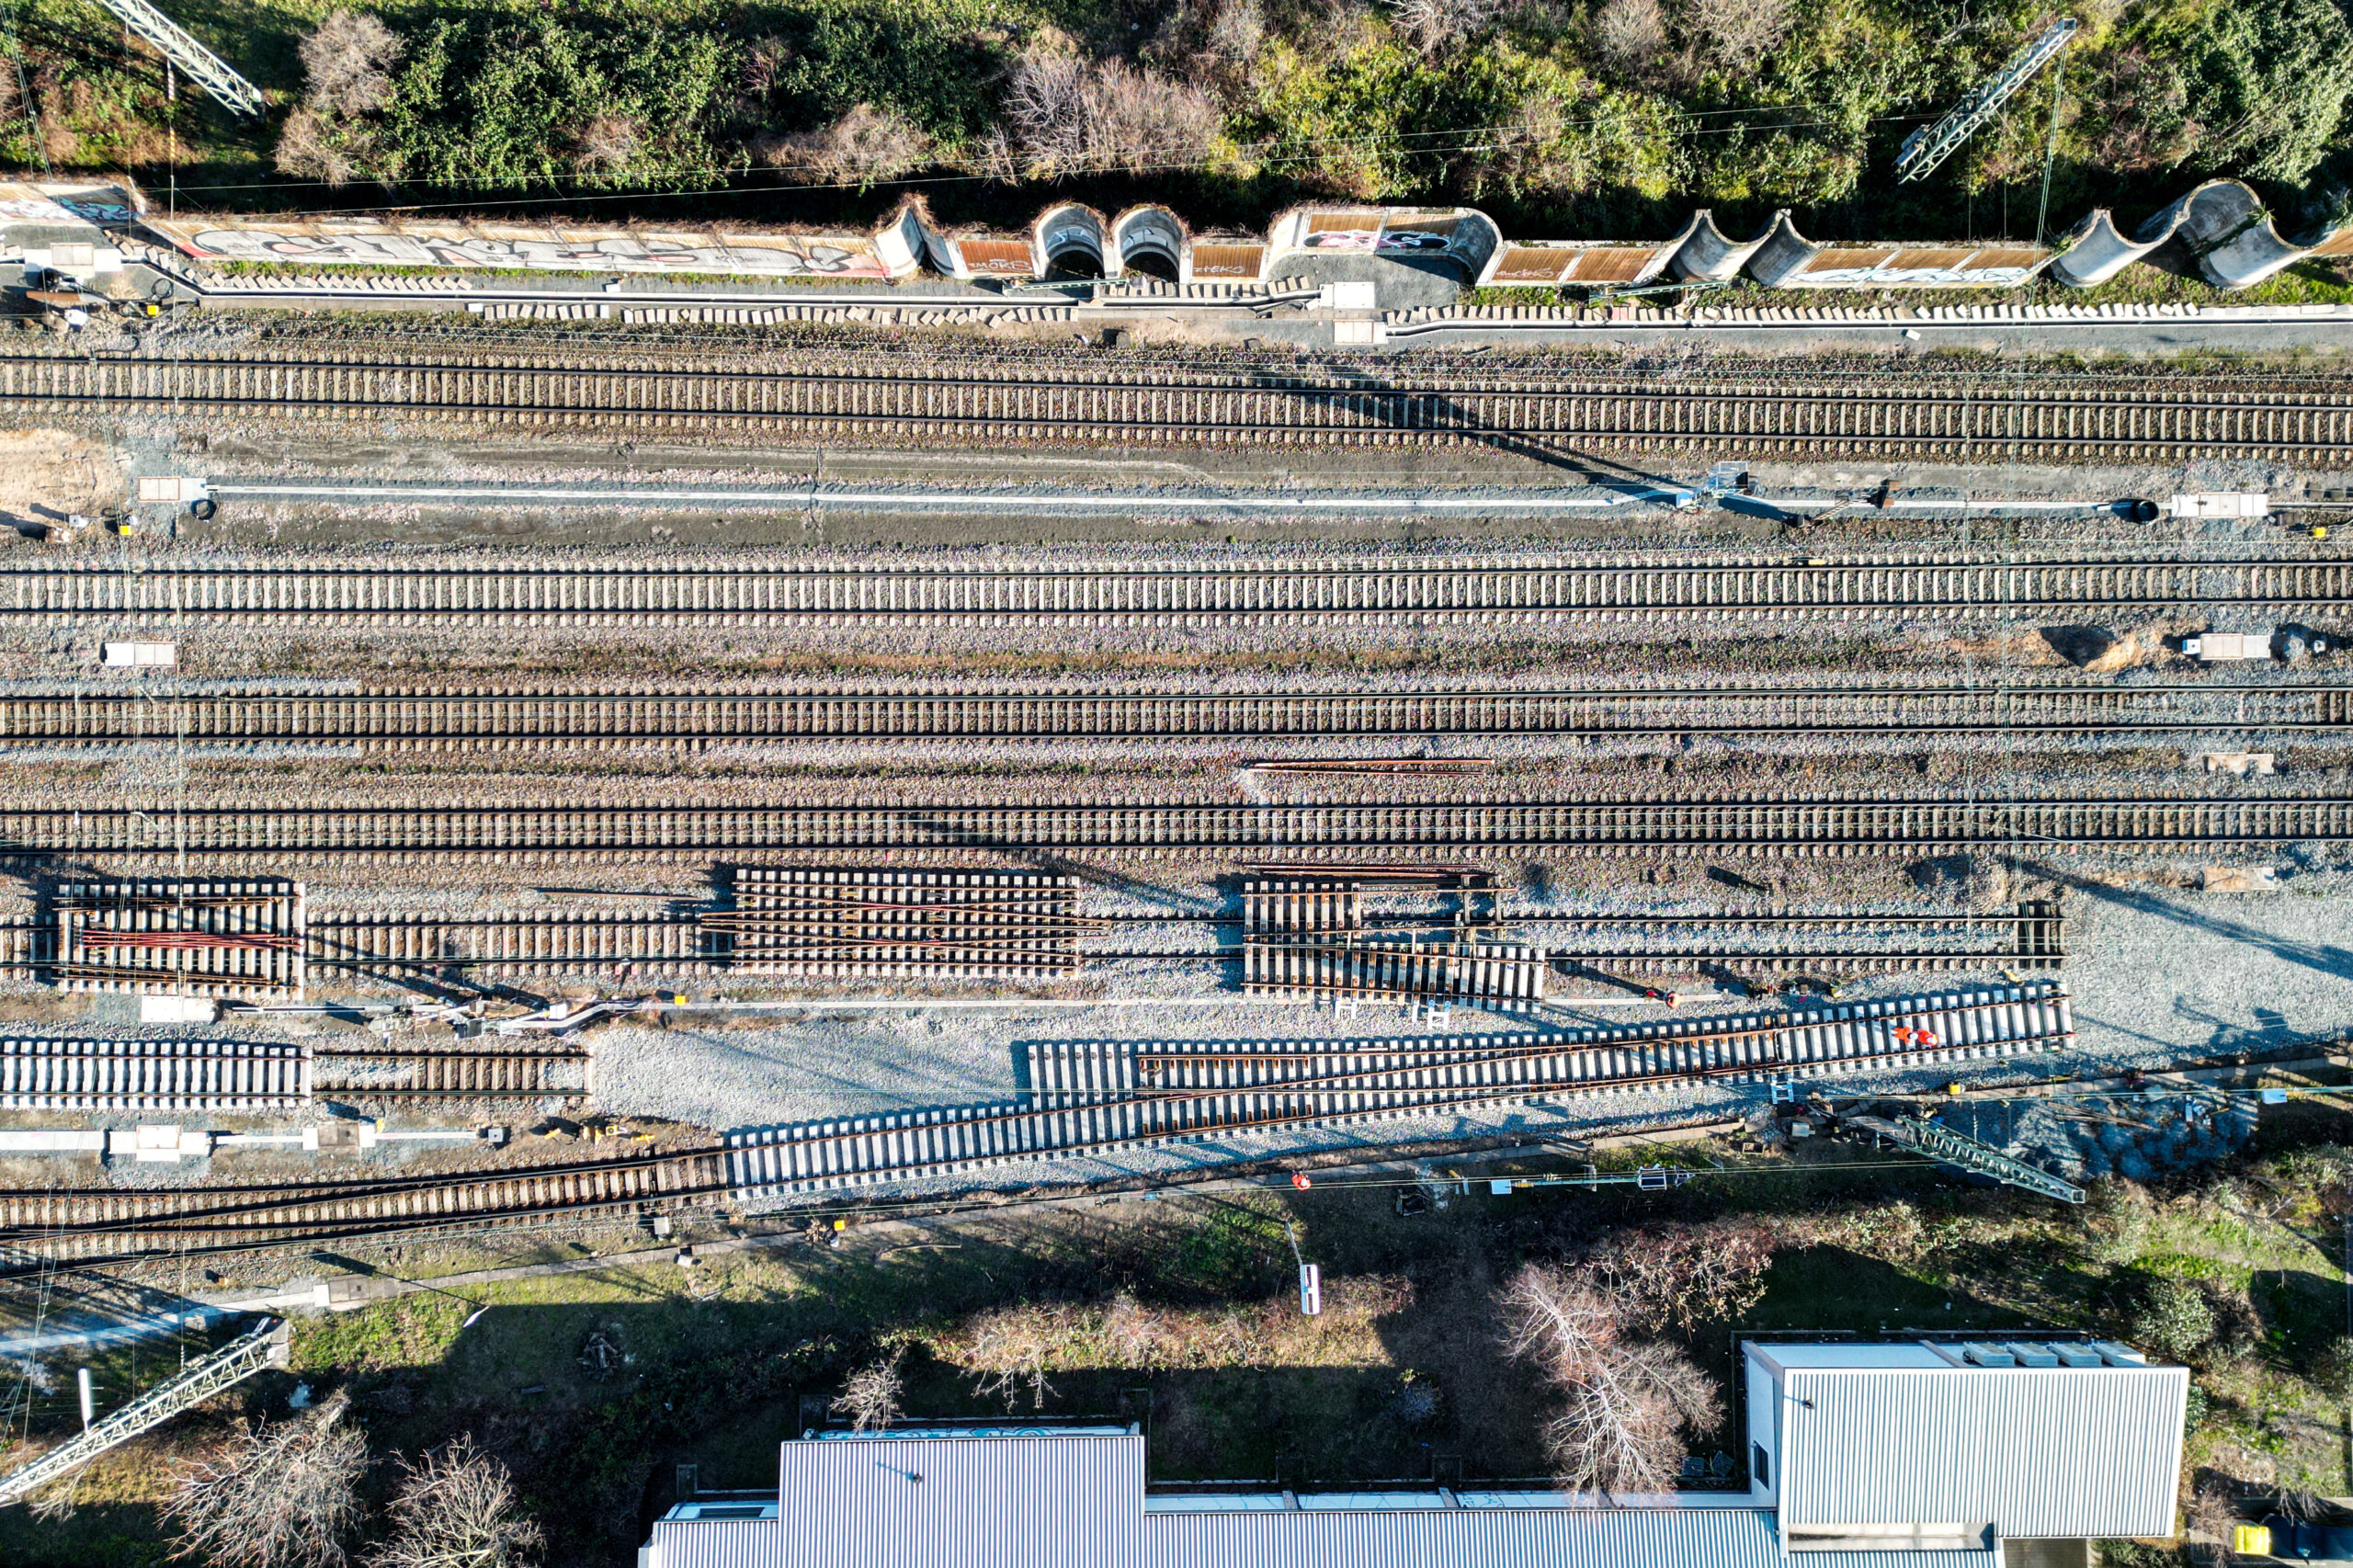 Track renewal from a bird's eye view